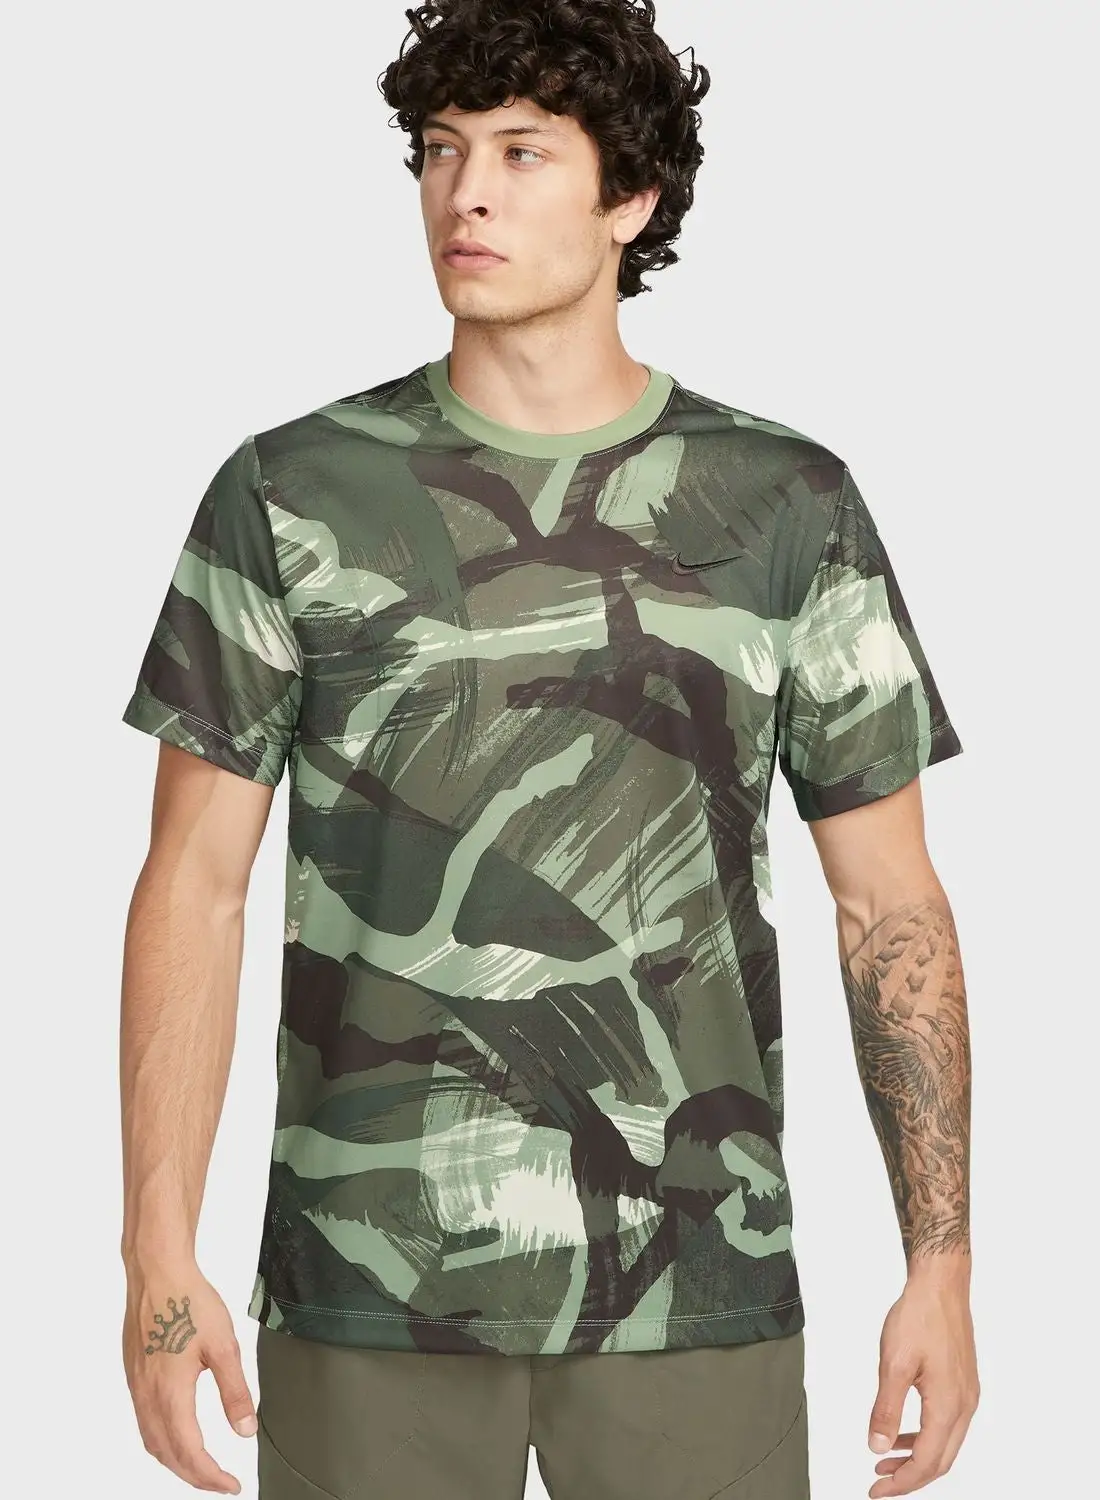 Nike Dri-Fit All Over Printed Camo T-Shirt